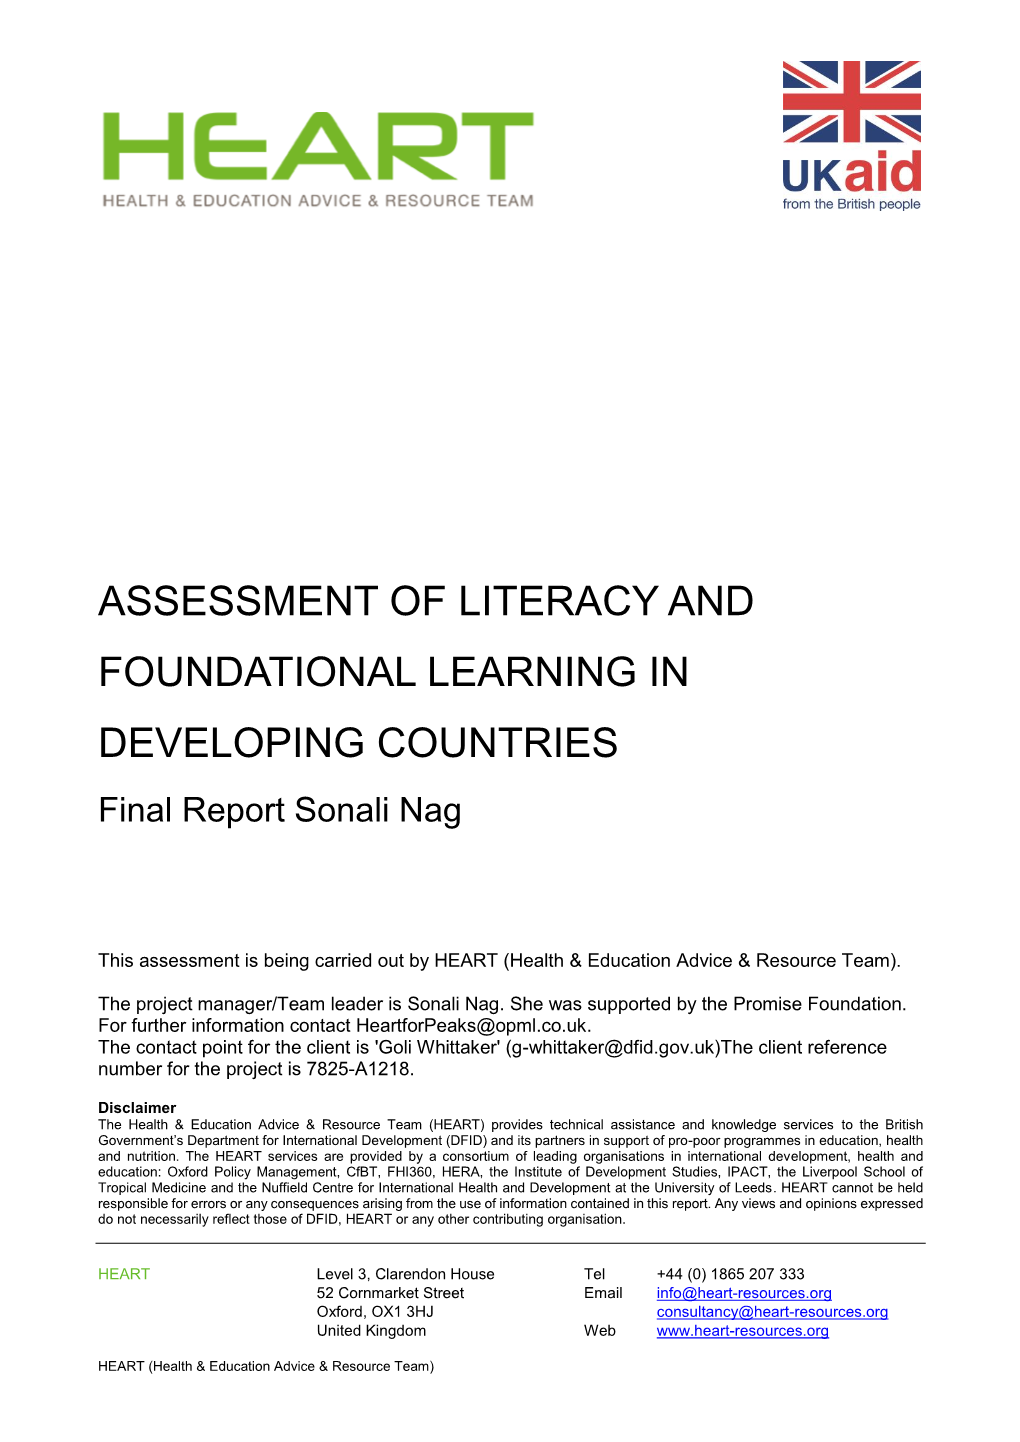 Assessment of Literacy and Foundational Learning In